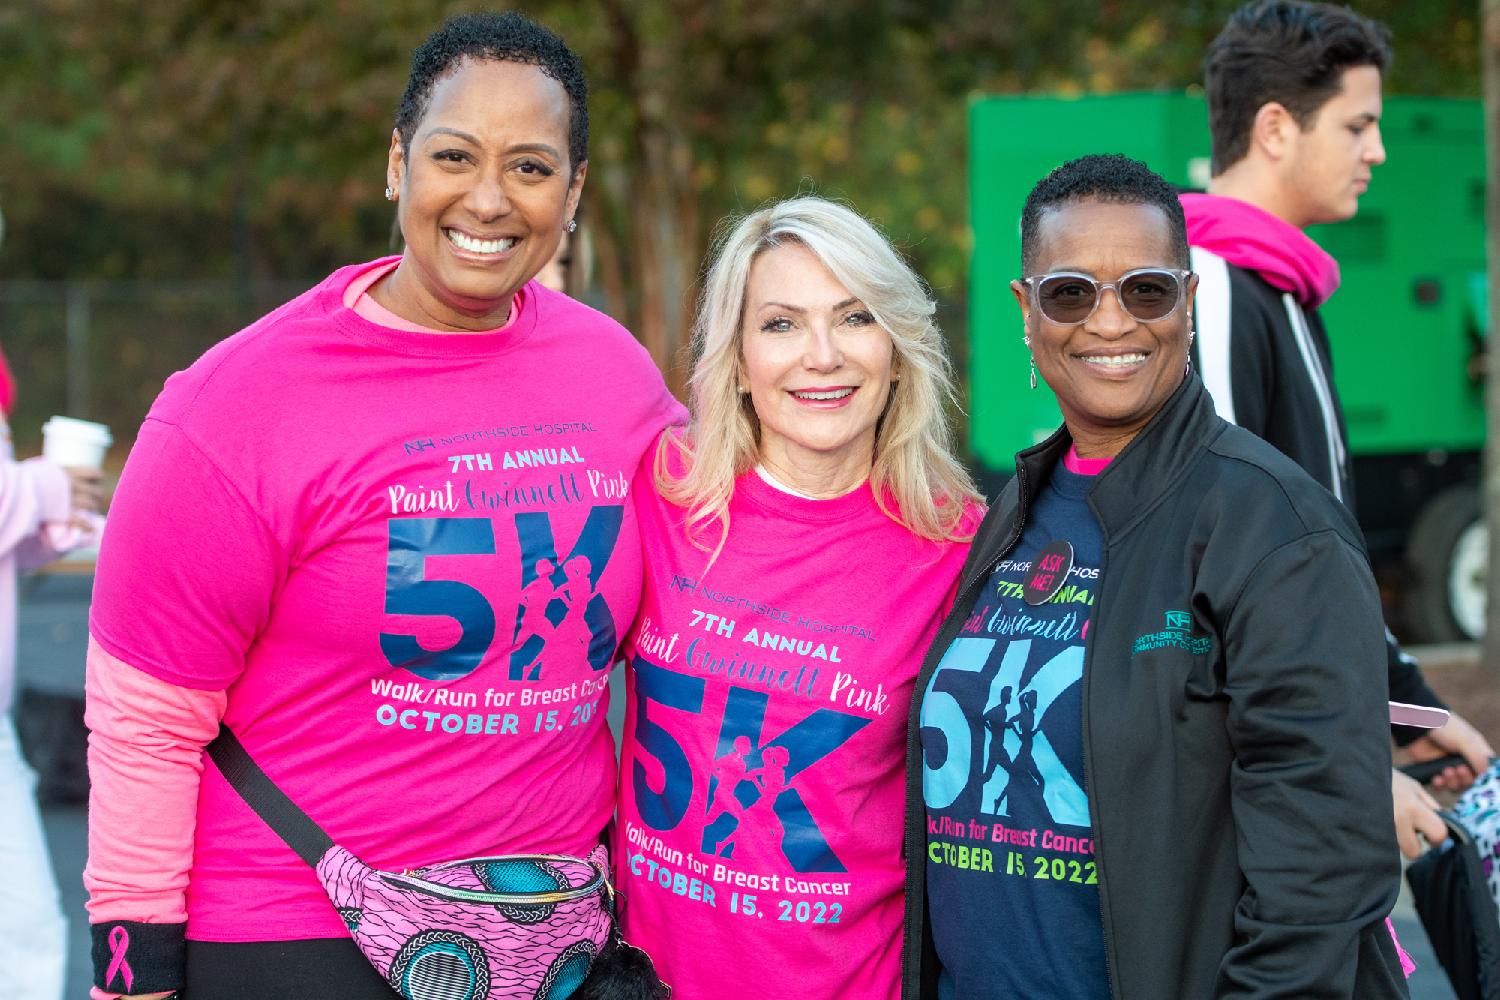 When Is The 5K Run For Breast Cancer